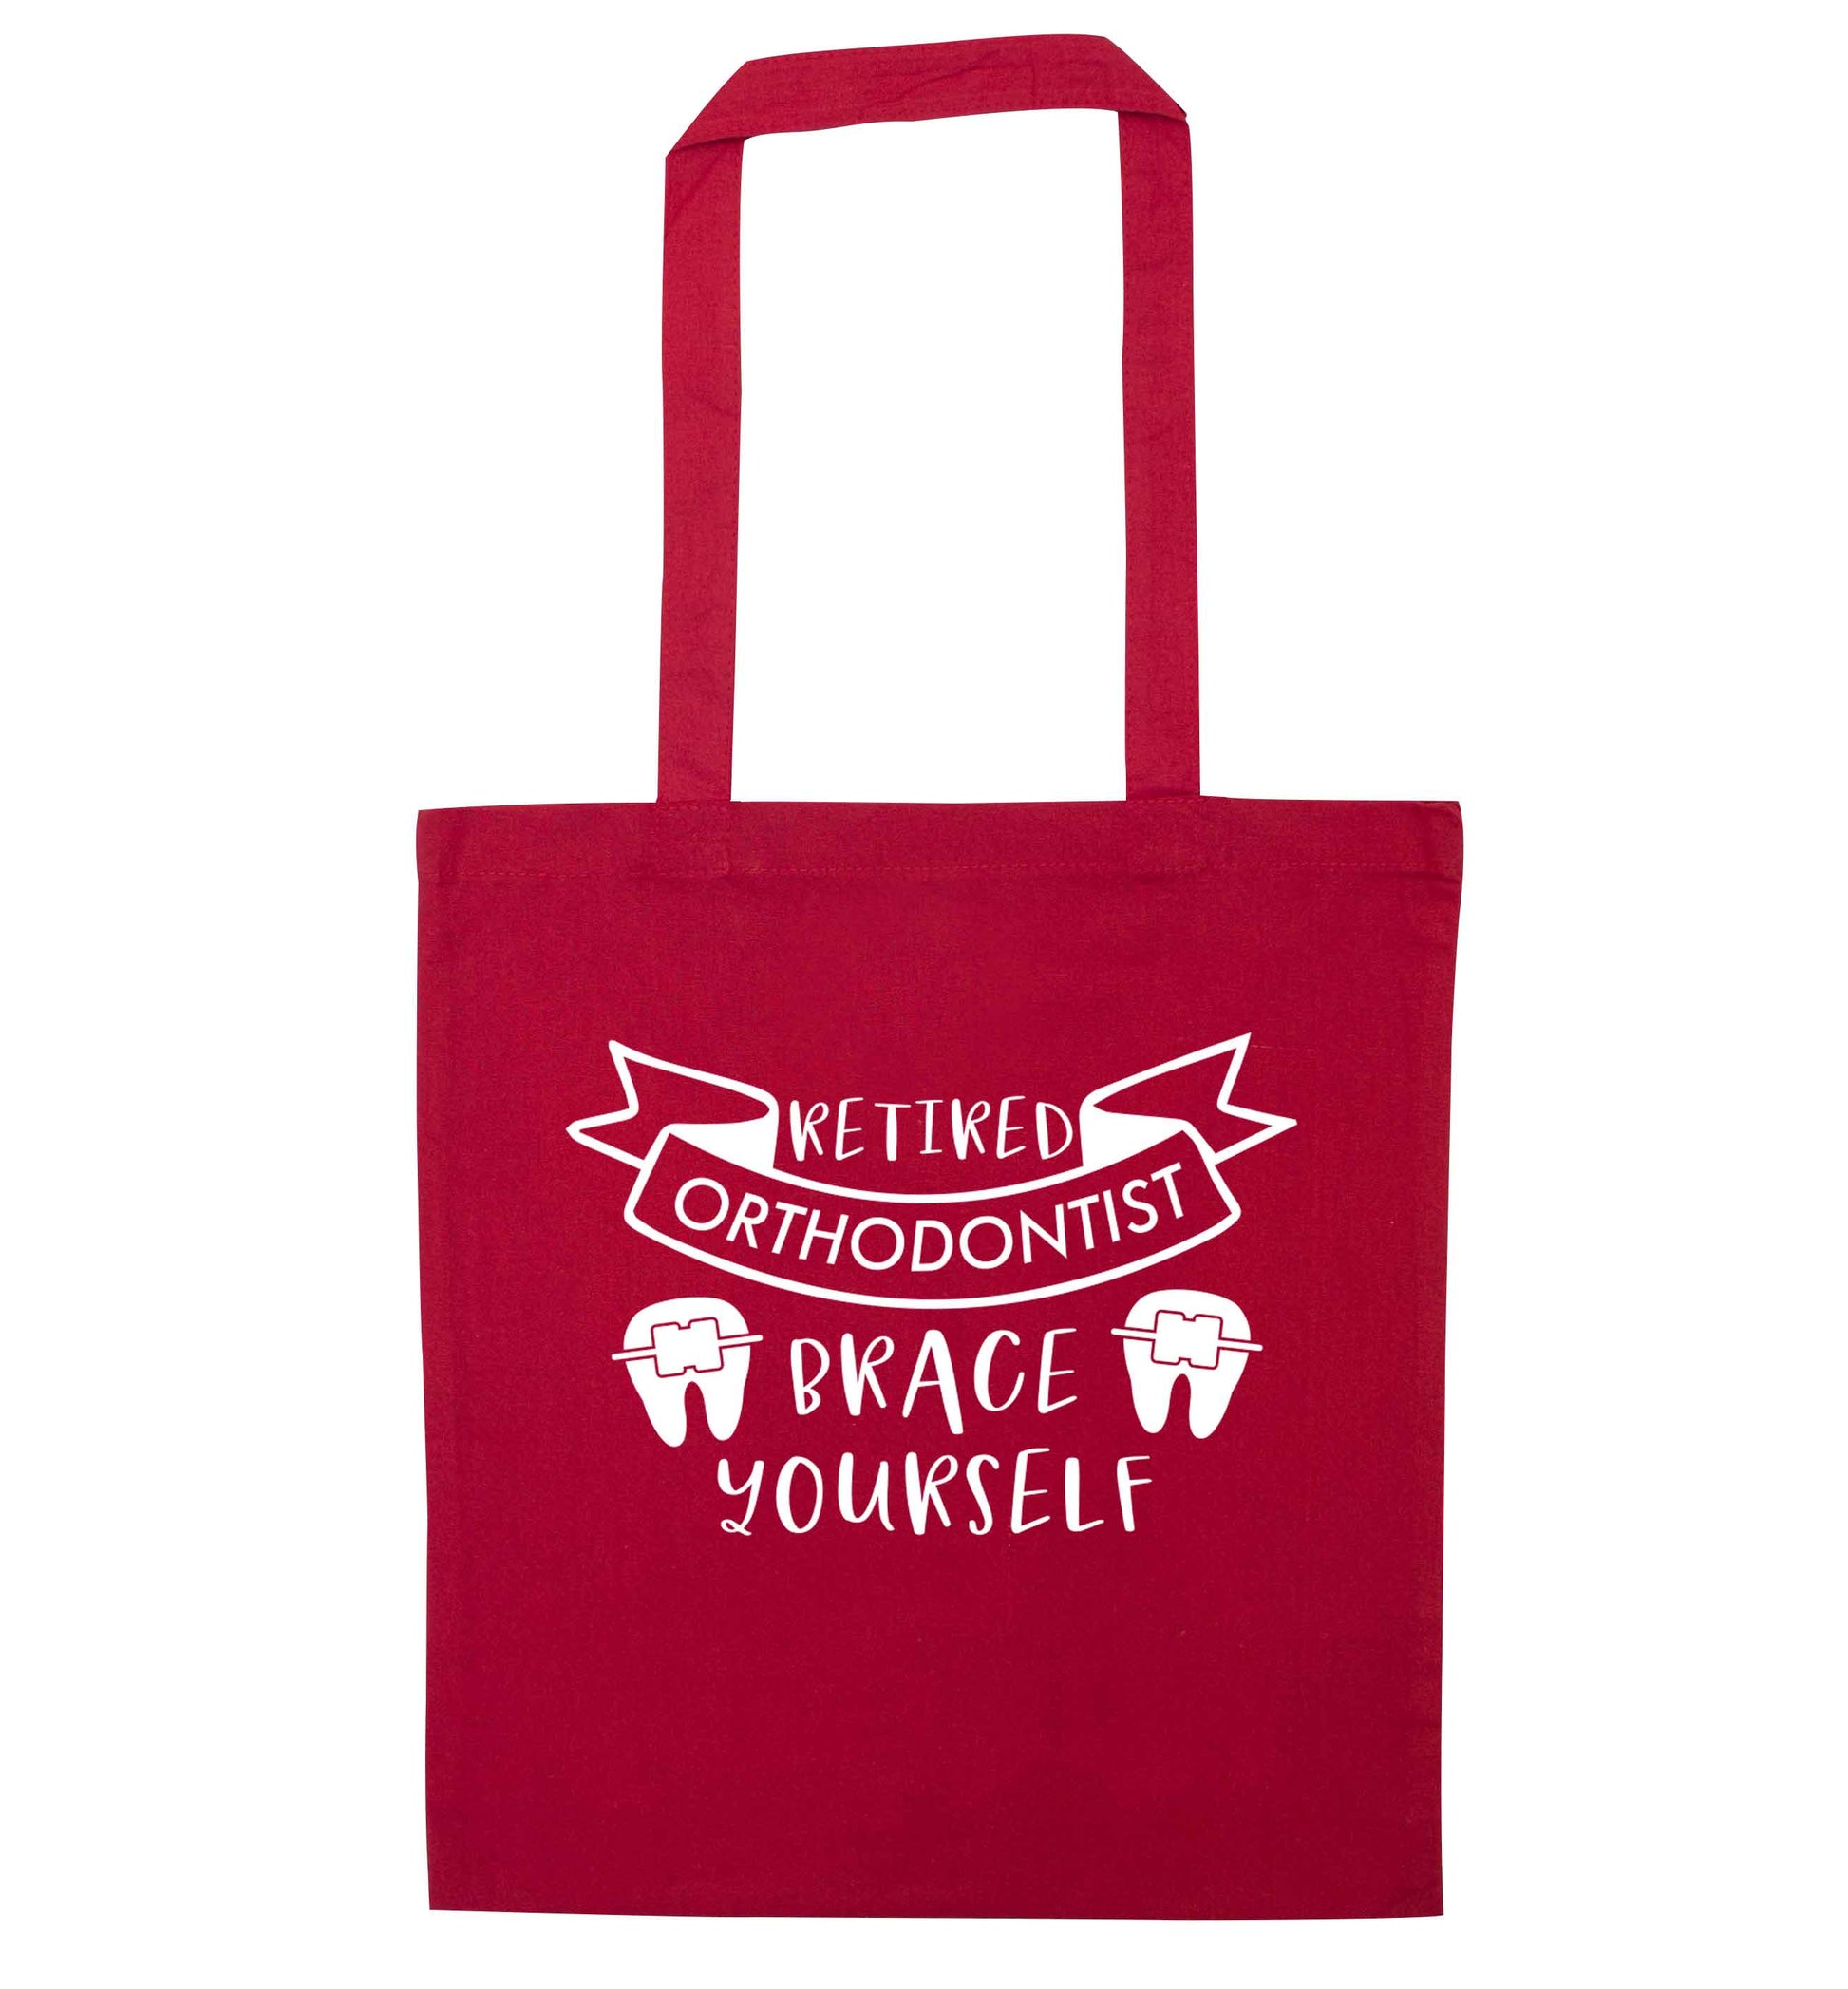 Retired orthodontist brace yourself red tote bag